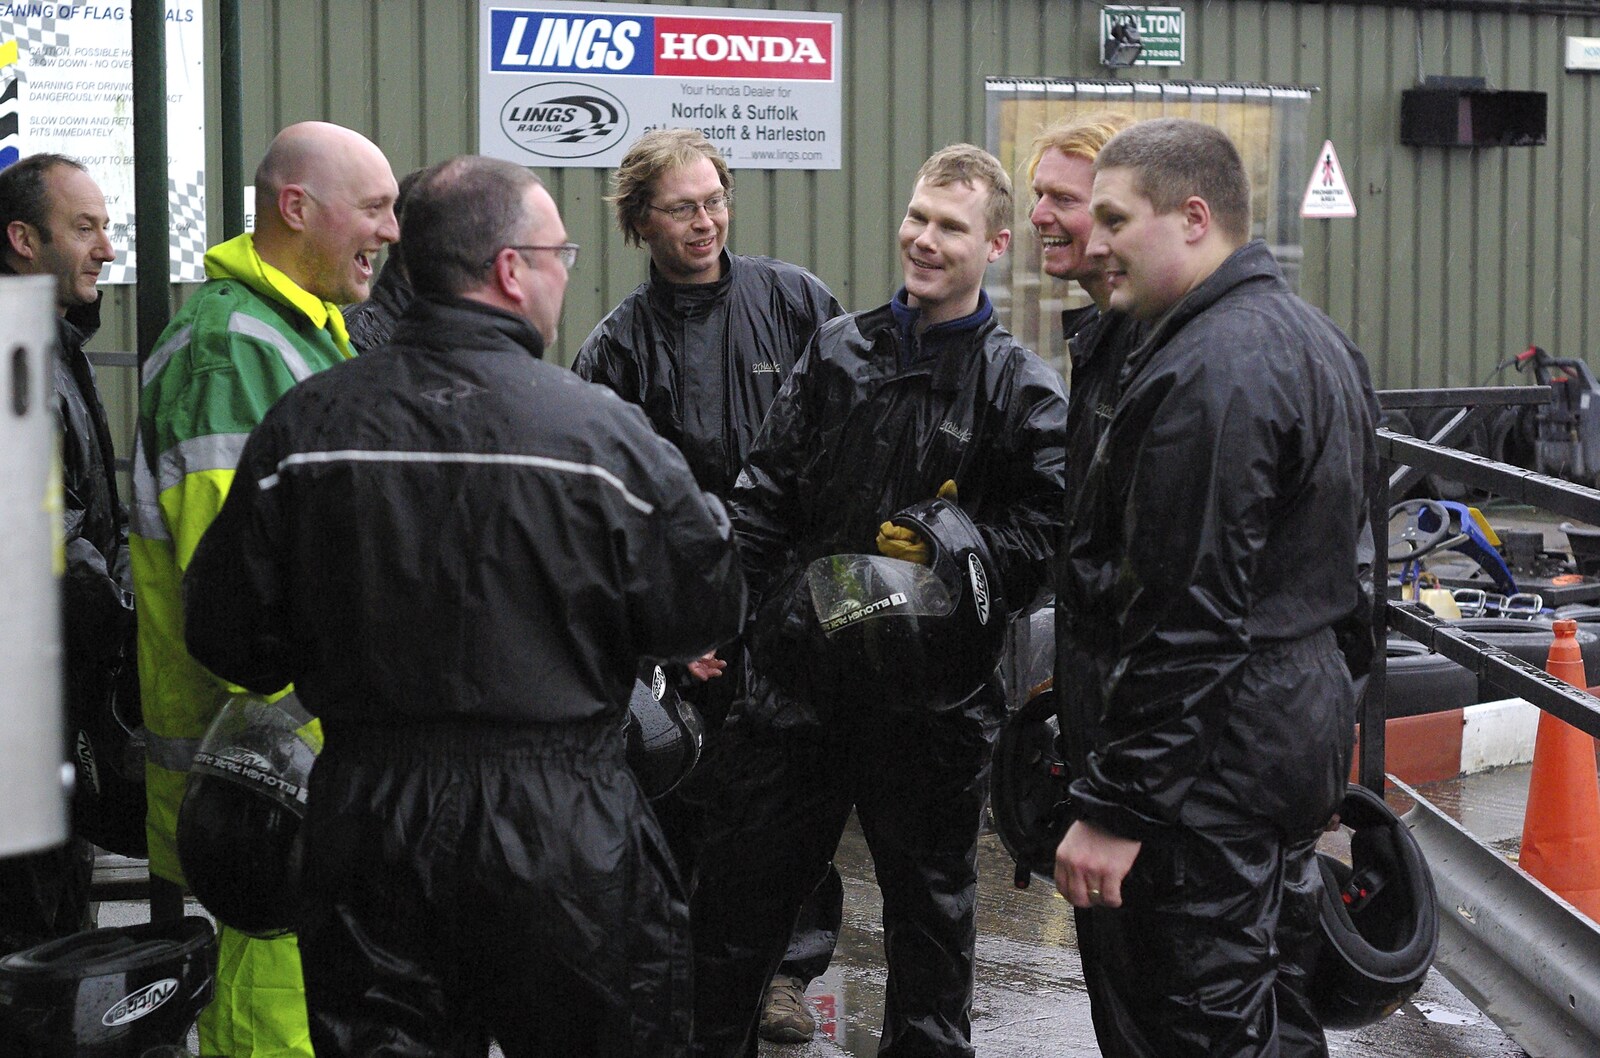 Gov's Stag-Day Karting, Ellough Airfield, Beccles, Suffolk - 19th January 2008: Team talk